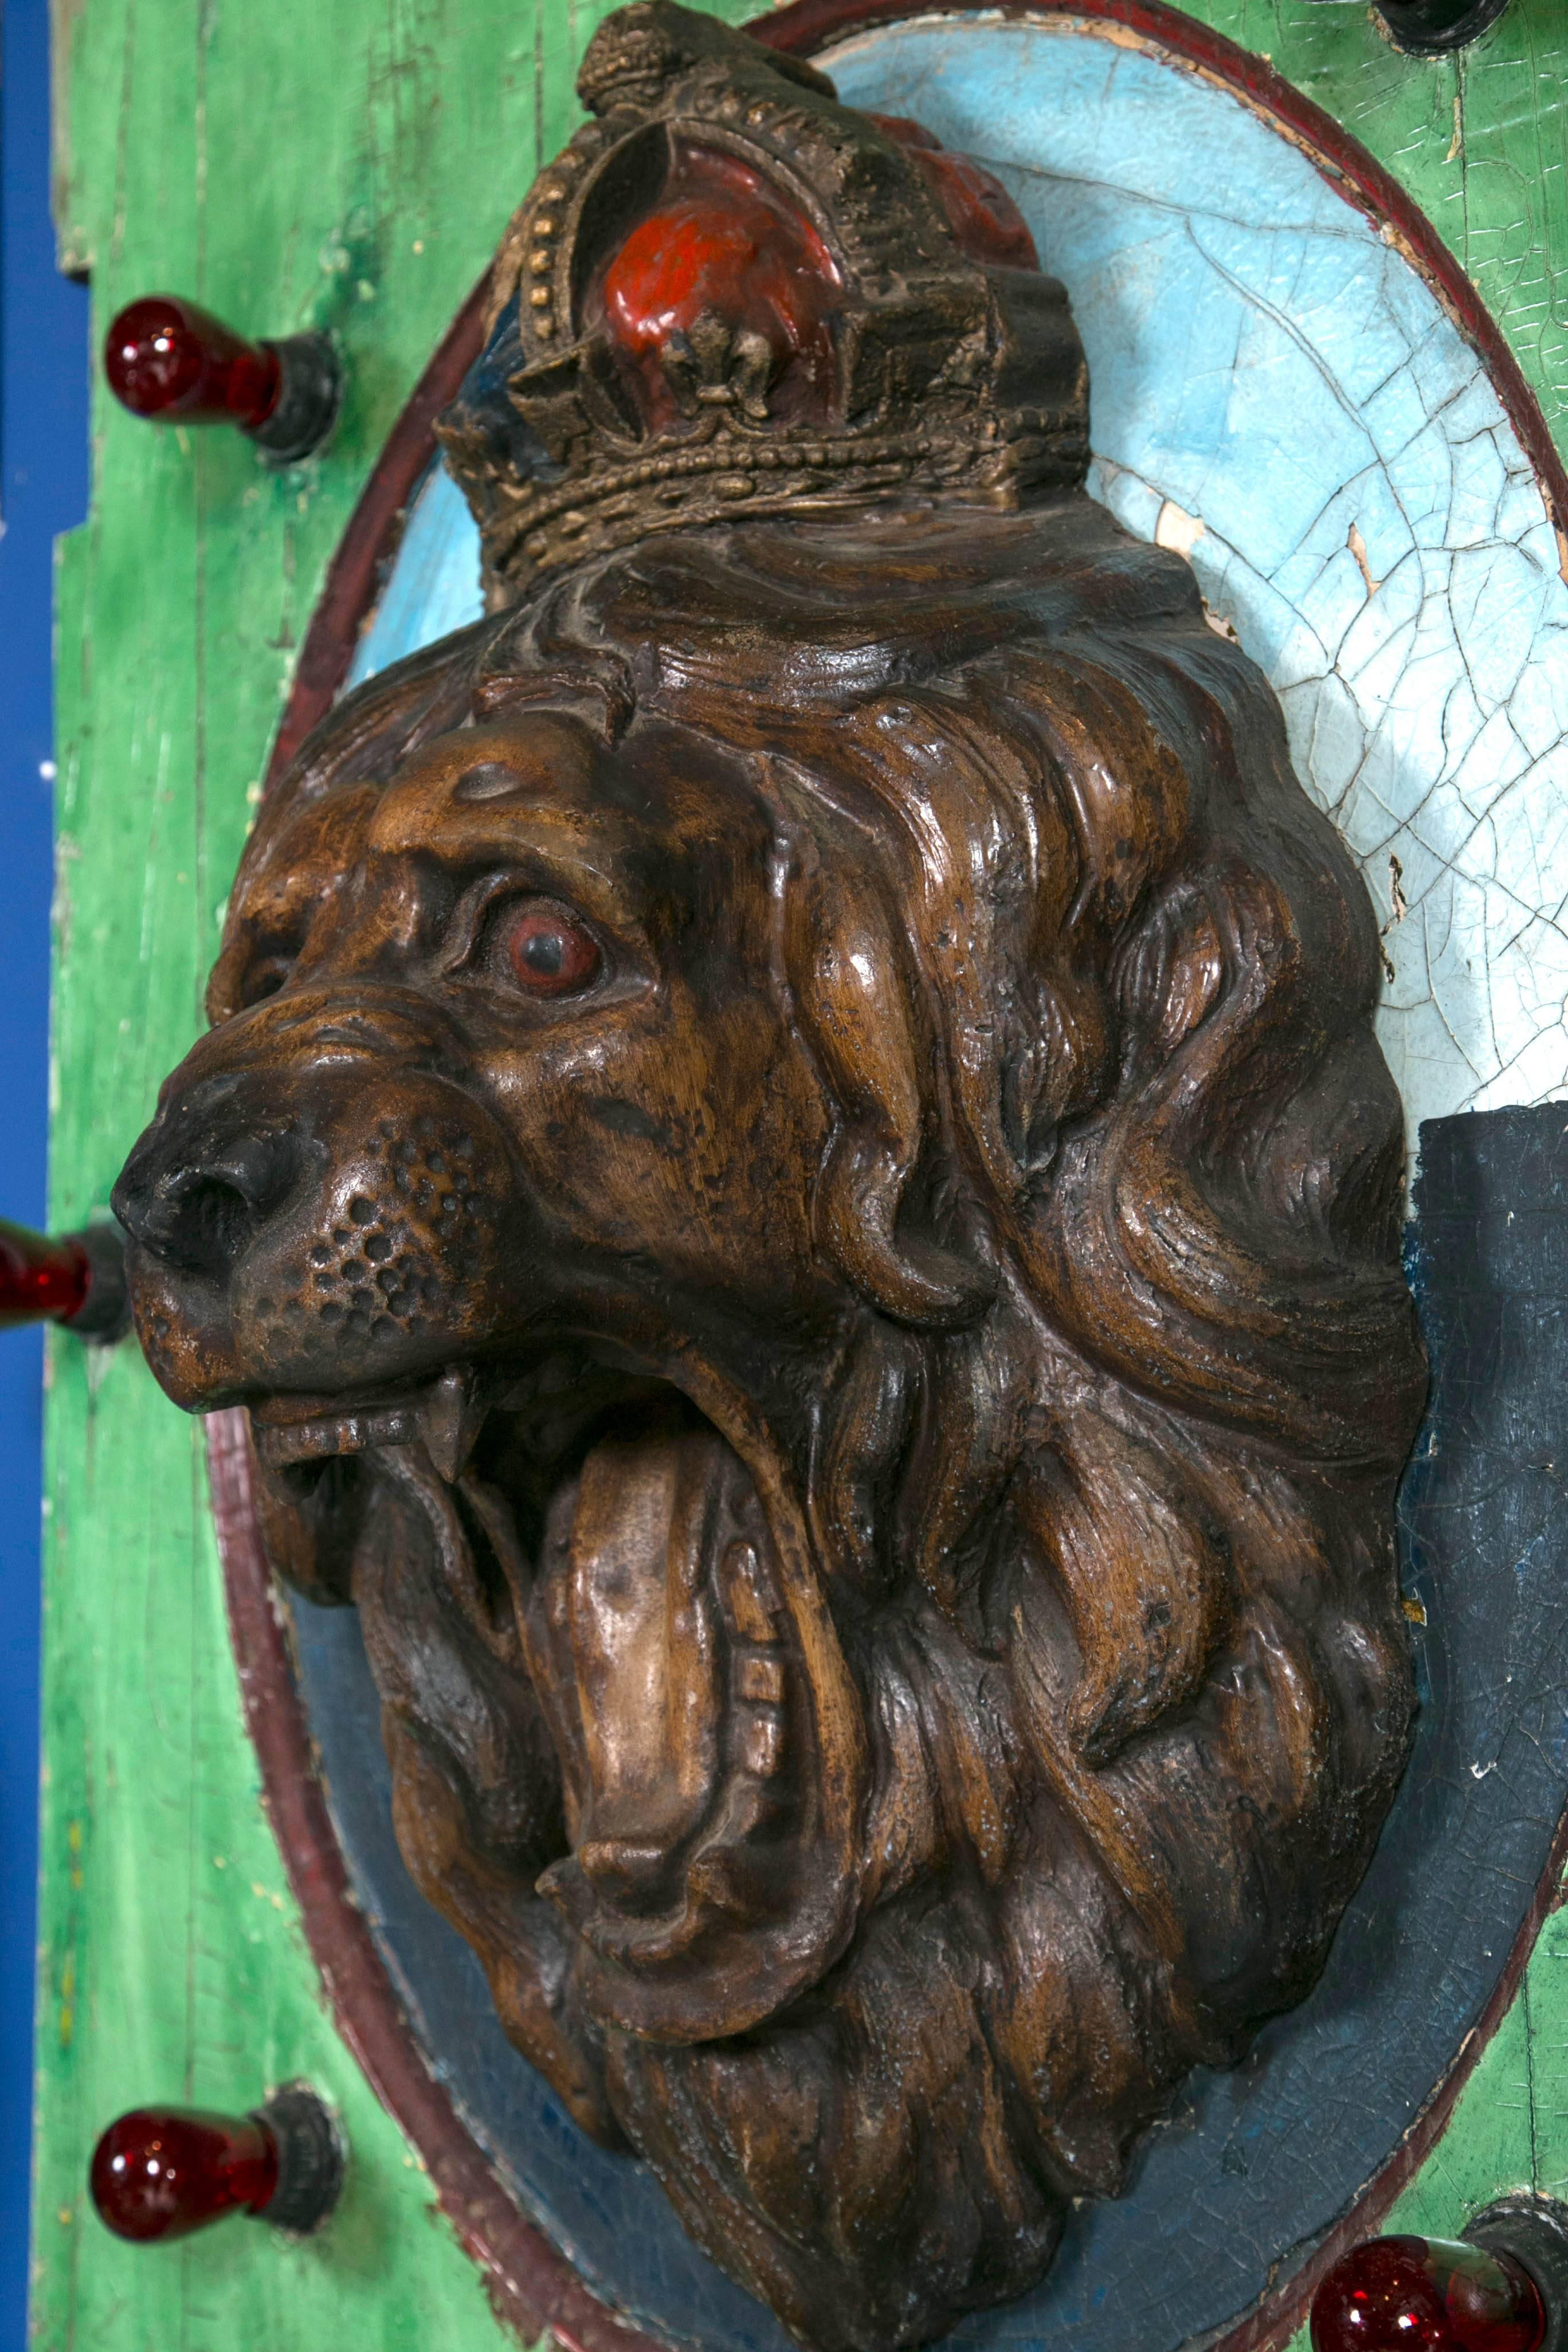 Early 1900s lion's head, wooden panel section from a carnival or traveling circus carousel. Bright carnival colors on the wooden panel surround a lion's head in relief with a ring of lights around the rim. Recently rewired from the original cloth